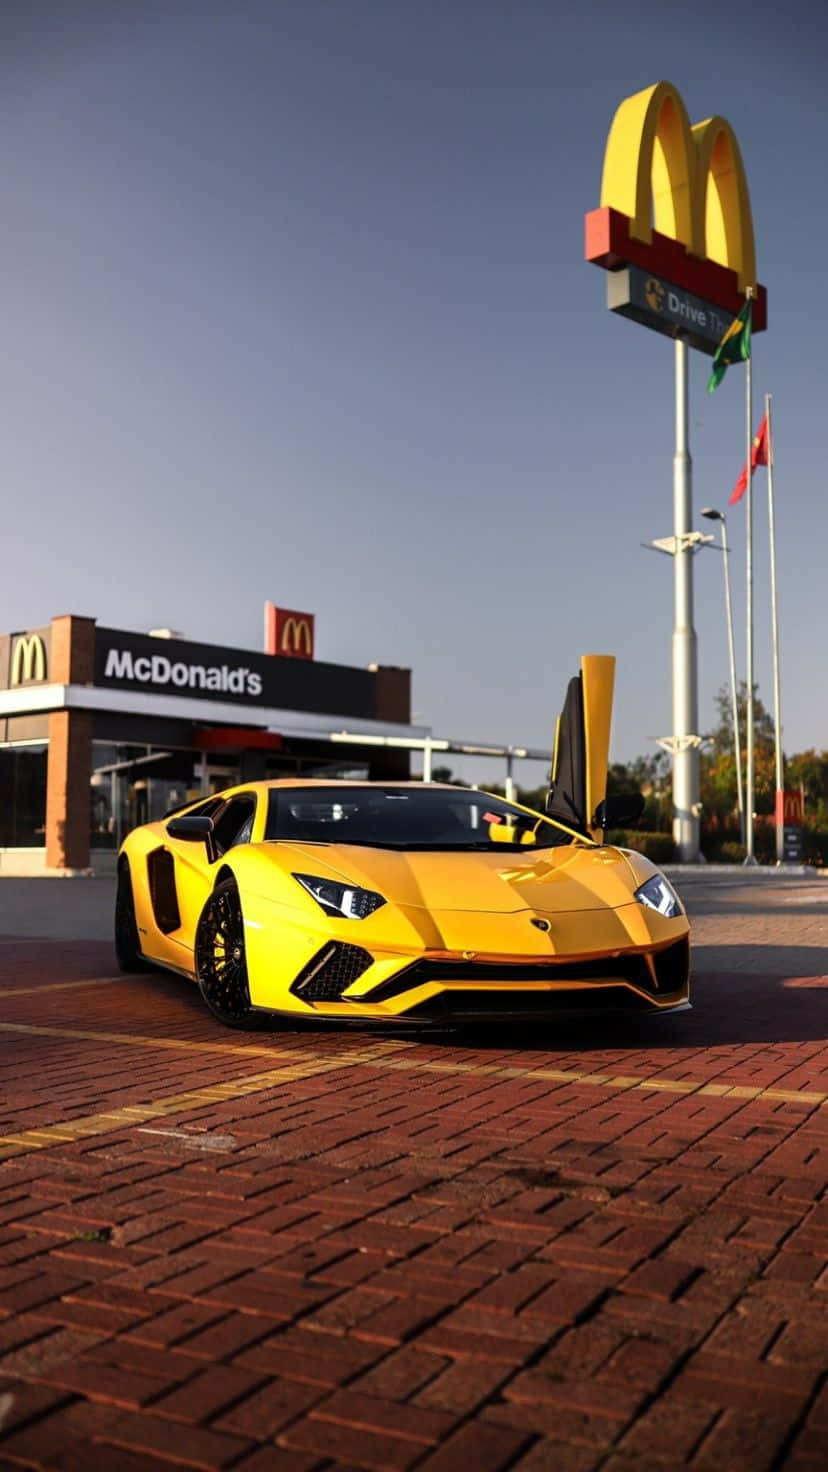 A Yellow Lamborghini Parked In Front Of A Mcdonald's